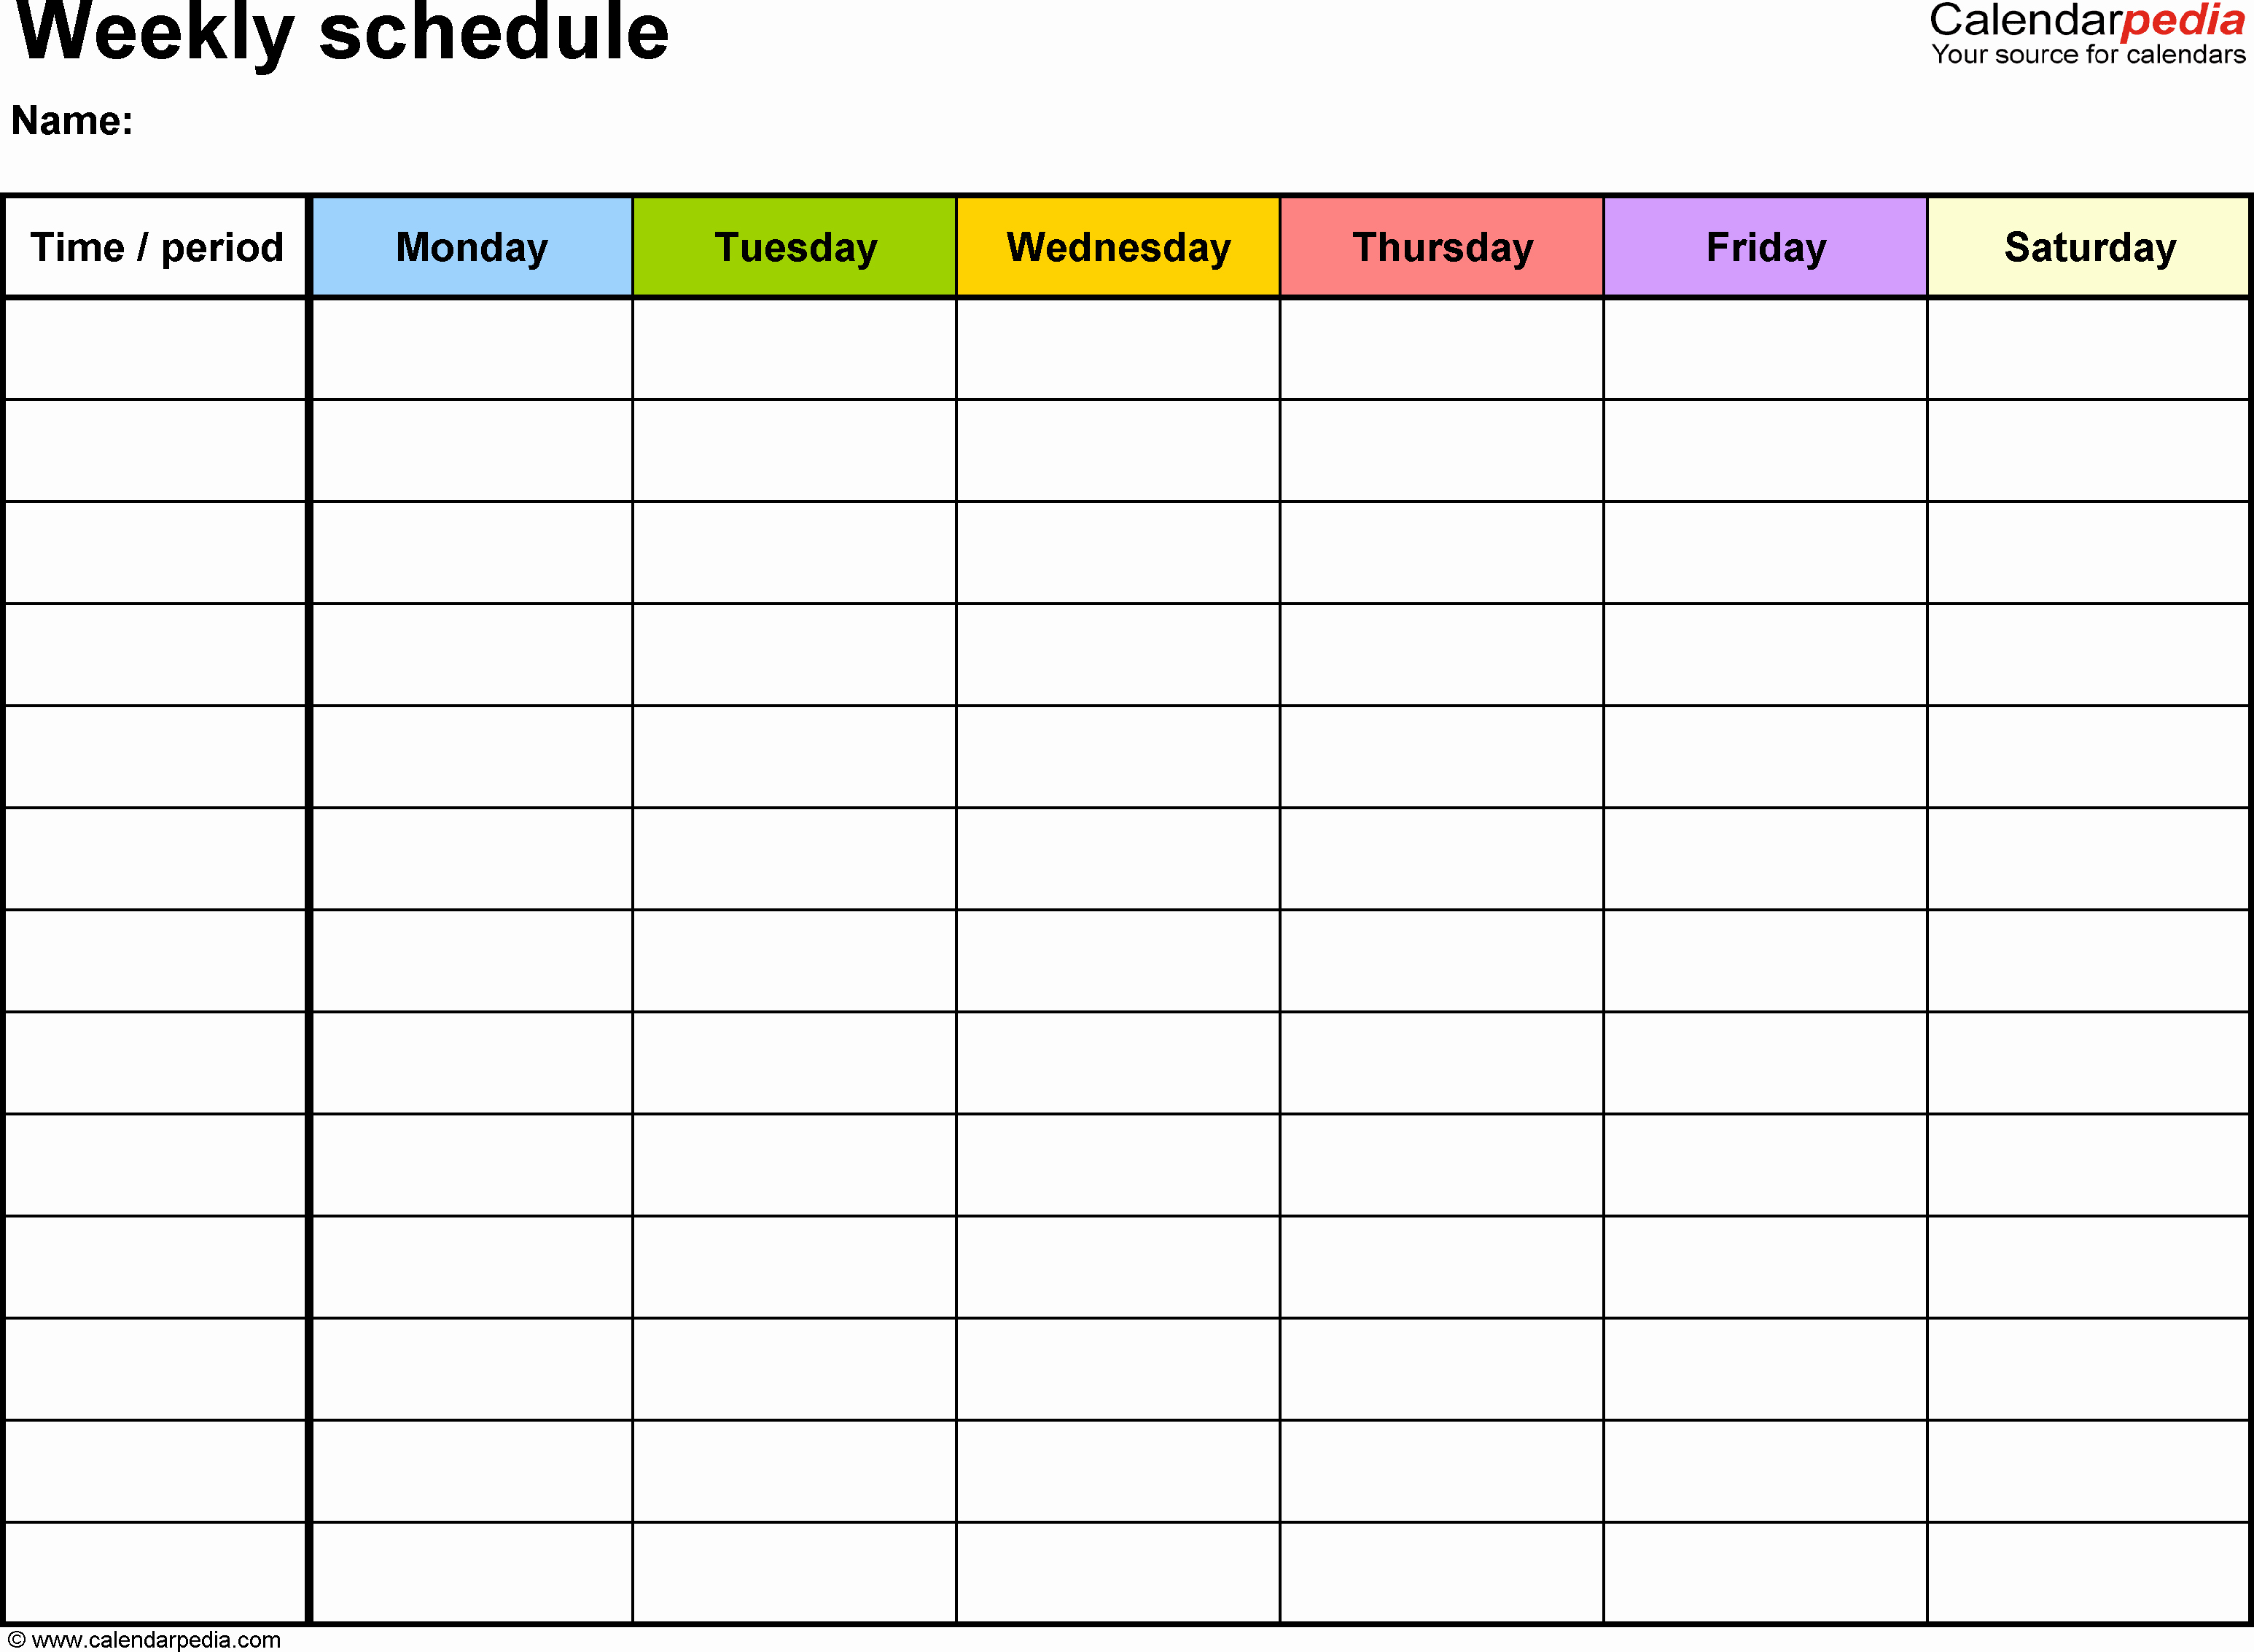 Weekly Schedule with Times Template Awesome Free Weekly Schedule Templates for Word 18 Templates